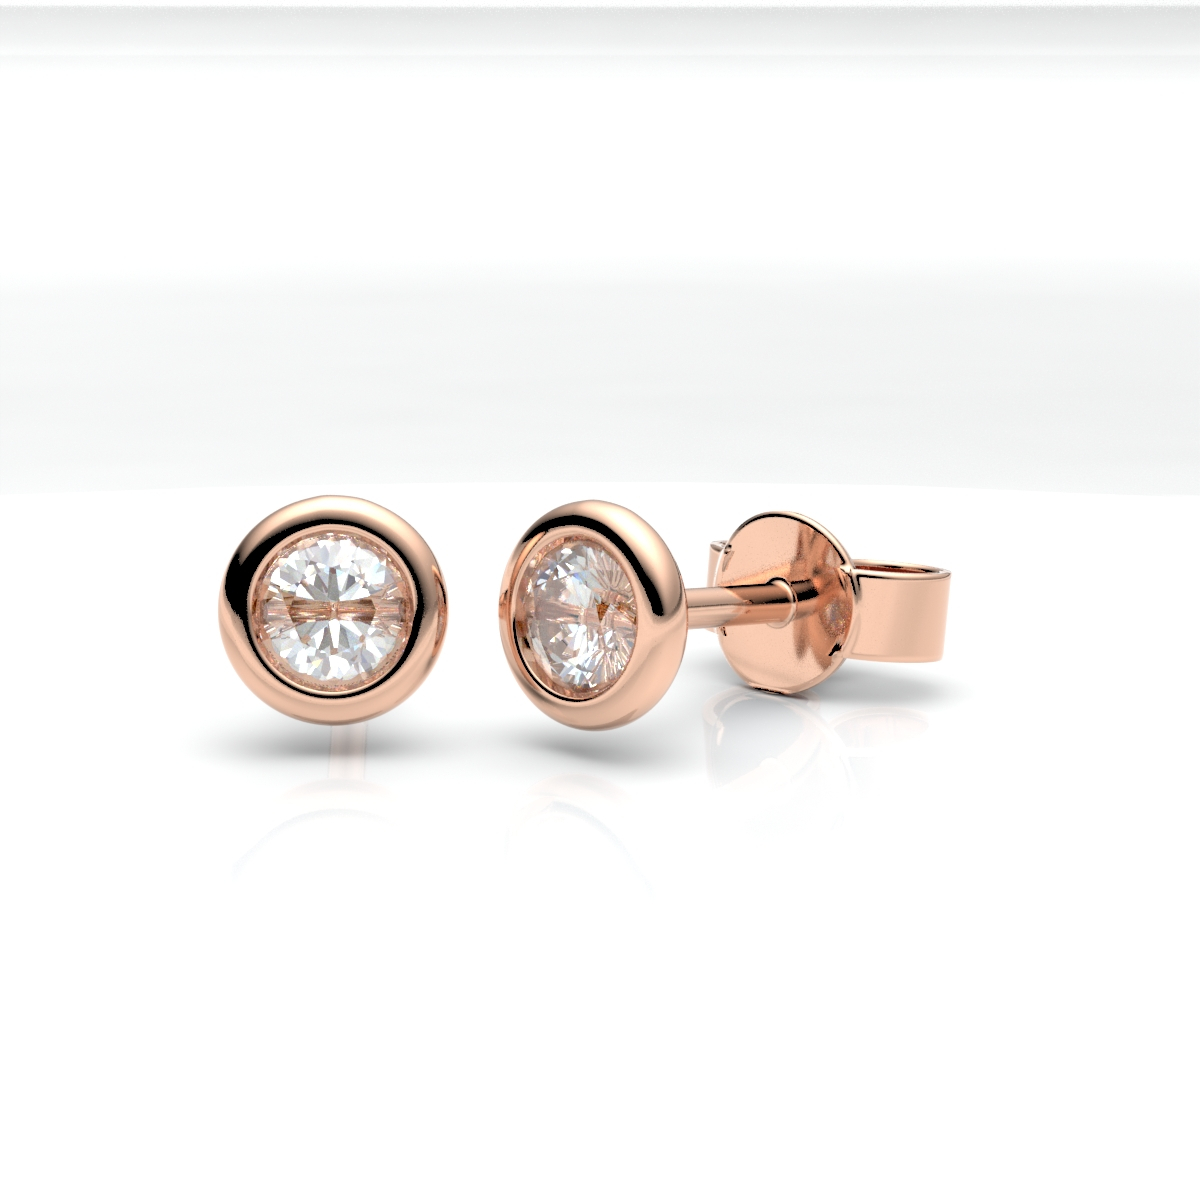 012504-5H34-001 | Ohrstecker Oberhausen 012504 585 Roségold<br> Brillant 0,300 ct H-SI ∅ 3.4mm<br>100% Made in Germany  